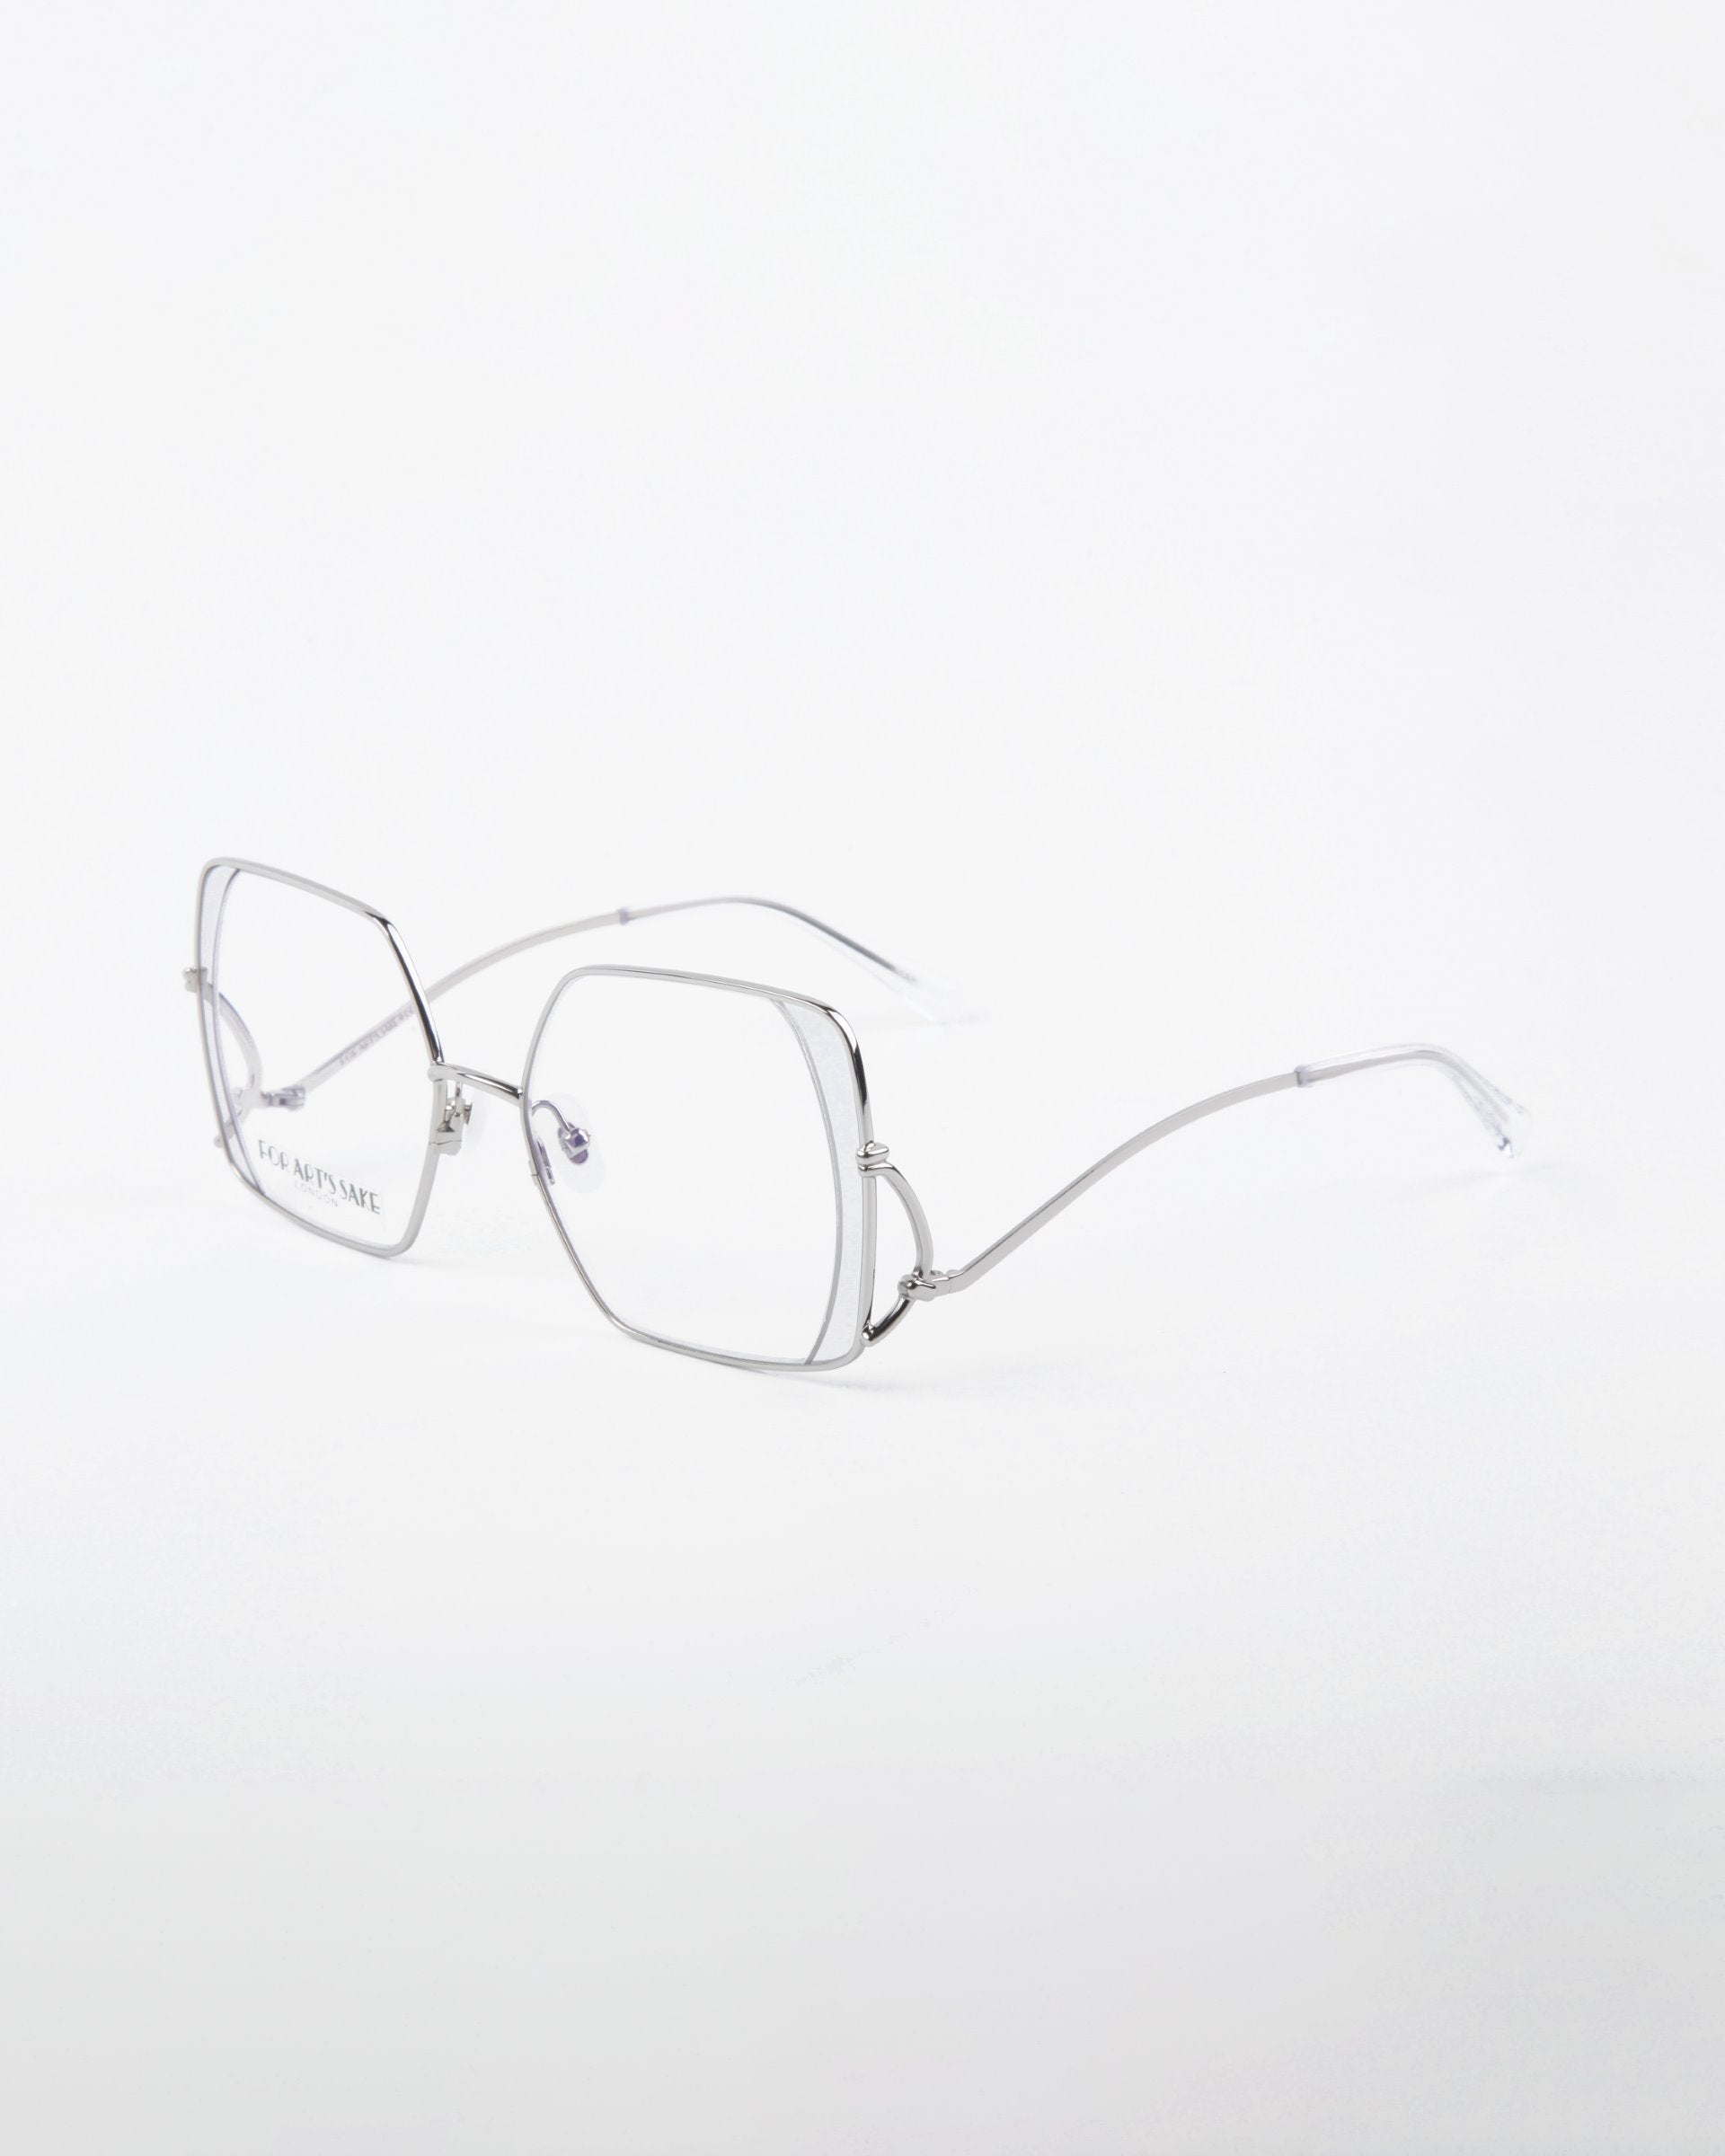 A pair of Candy eyeglasses by For Art&#39;s Sake® with silver wire frames. The lenses are slightly oversized and hexagonal, featuring a blue light filter for added eye protection. Thin stainless steel arms extend from the lenses. The design is sleek and modern, set against a plain white background.